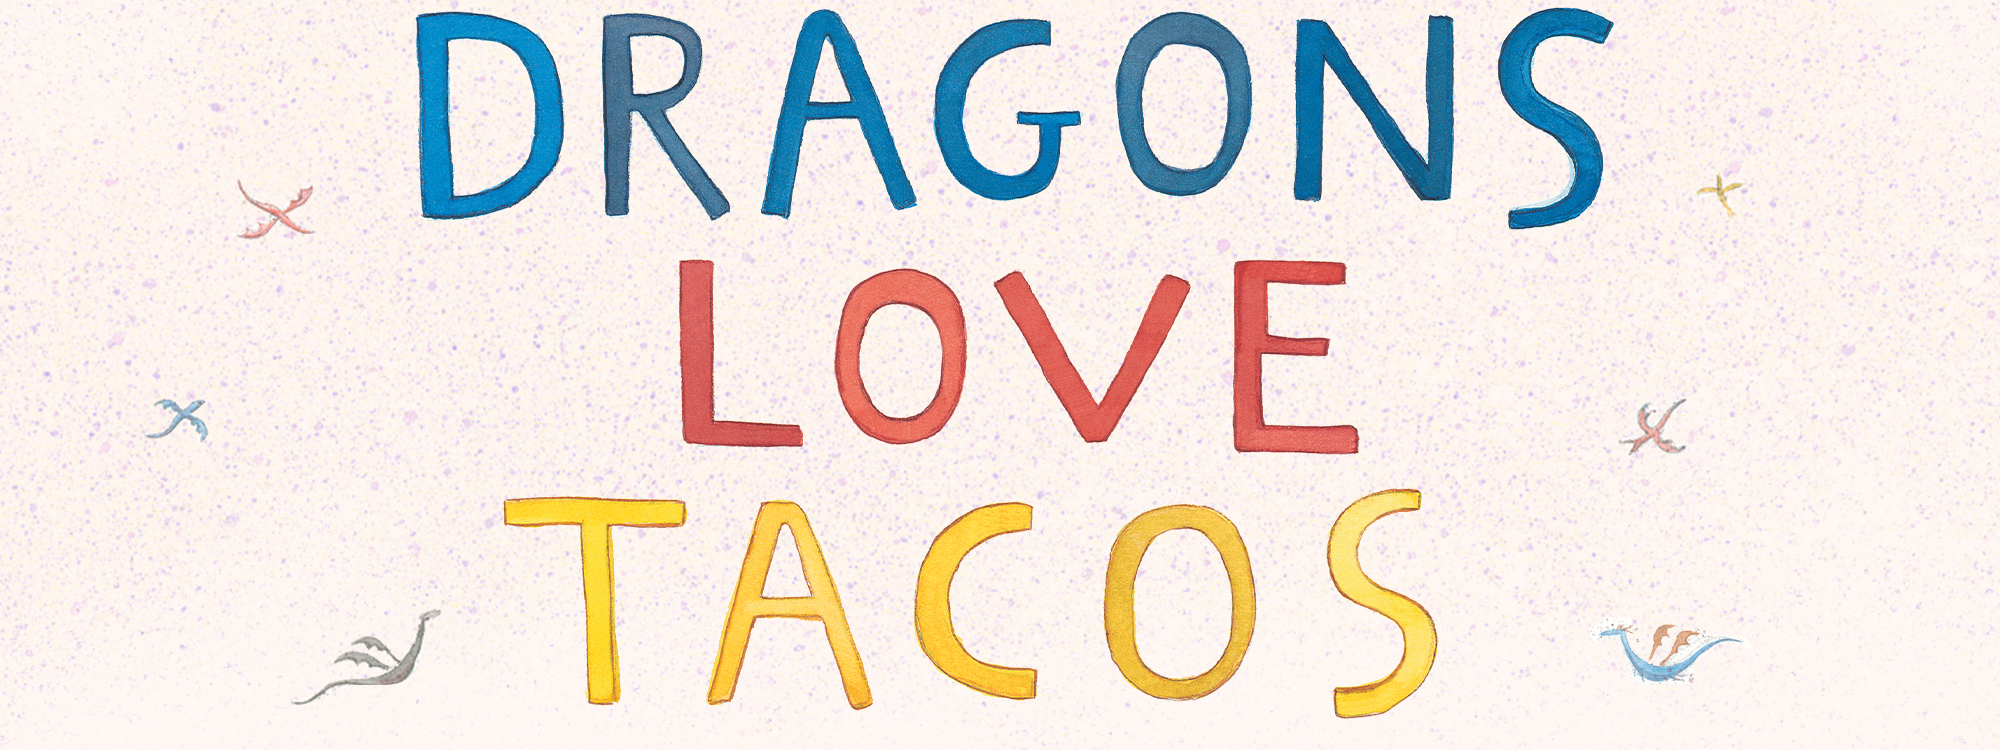 Yoto Welcomes Dragons Love Tacos to Its Ever-Growing Audio Library